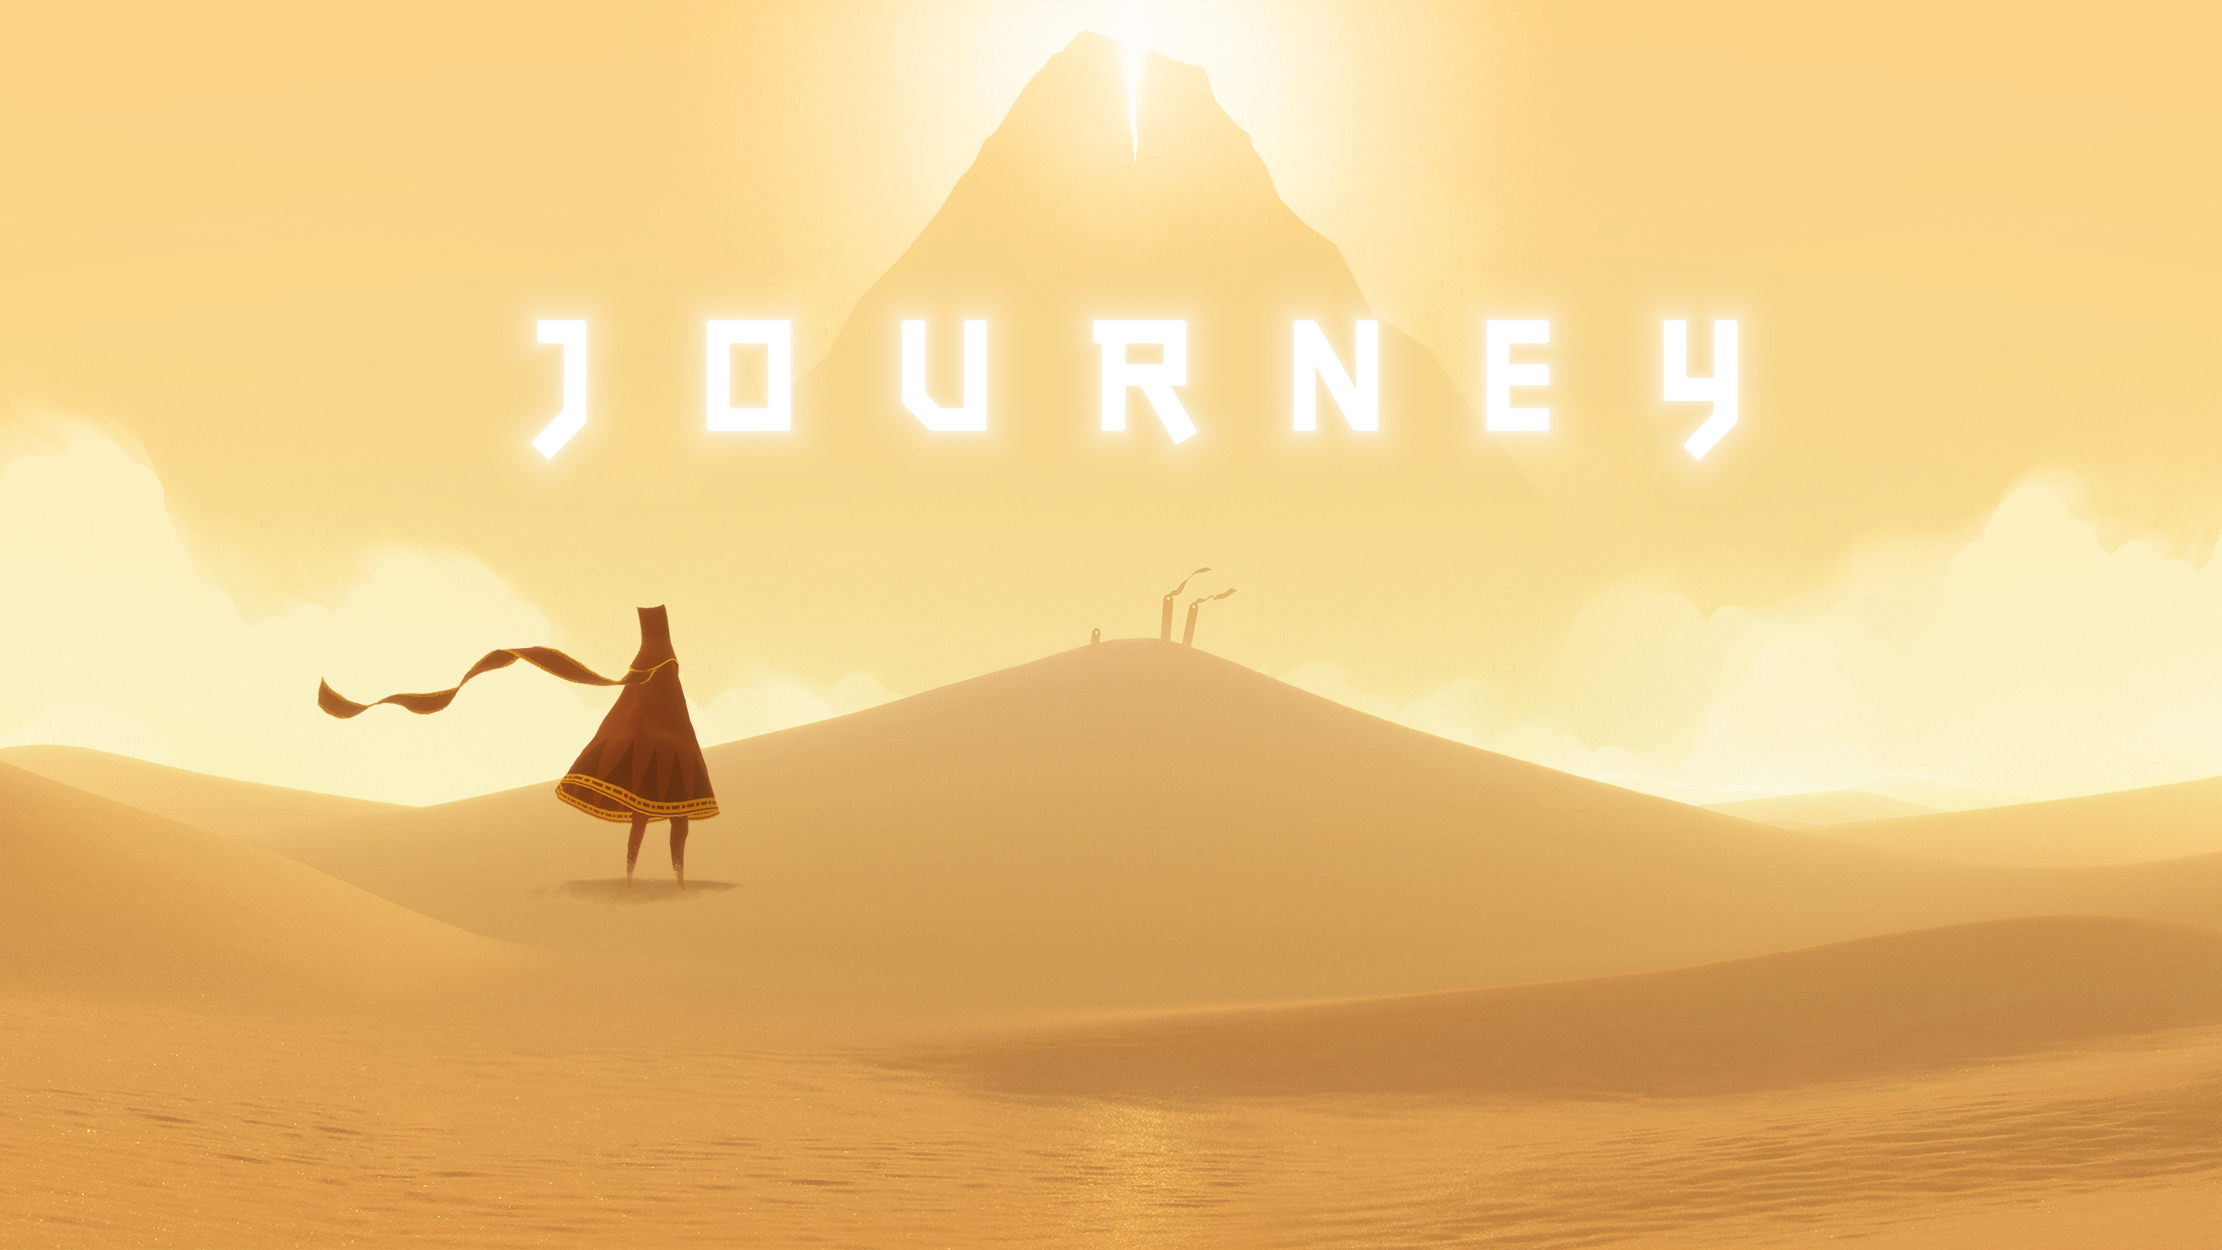 Journey is an amazing game that I first played with my nerd friends, then my parents.